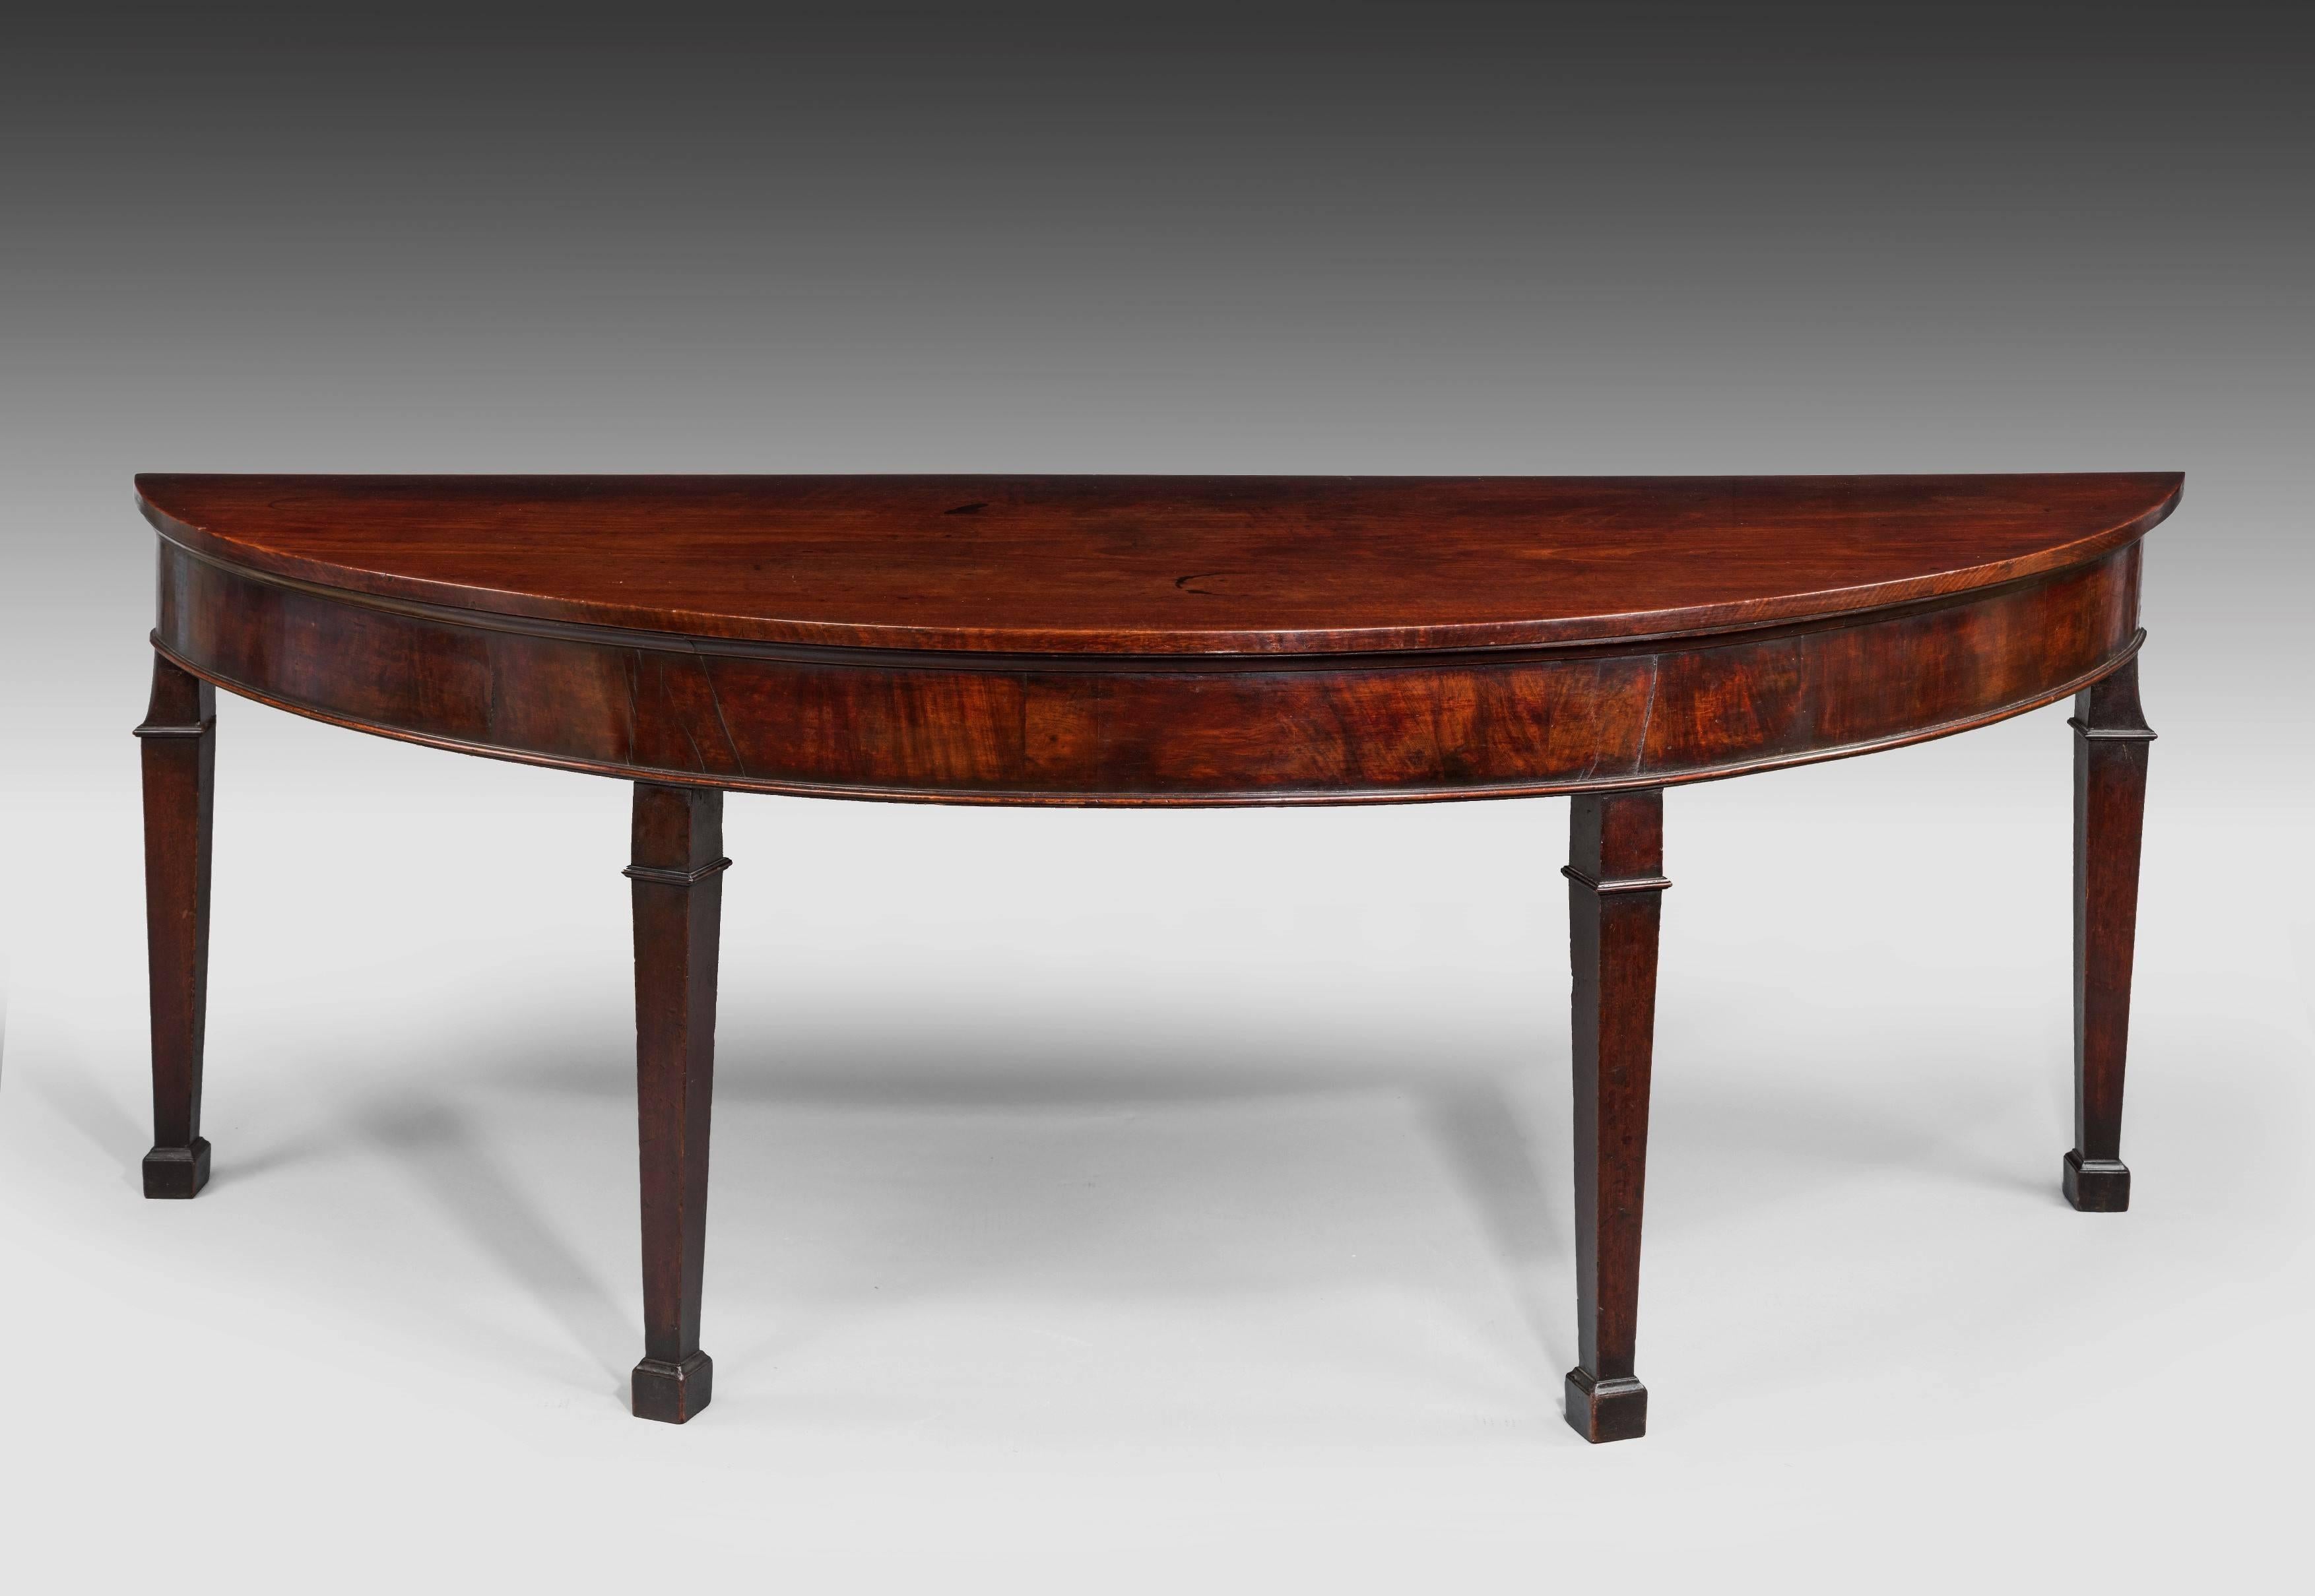 An impressive Georgian mahogany Irish demilune side table of large proportions, the figured demilune top of great colour and patination above a cavetto moulding; the figured mahogany frieze with a slender moulded edge, raised on square tapering legs